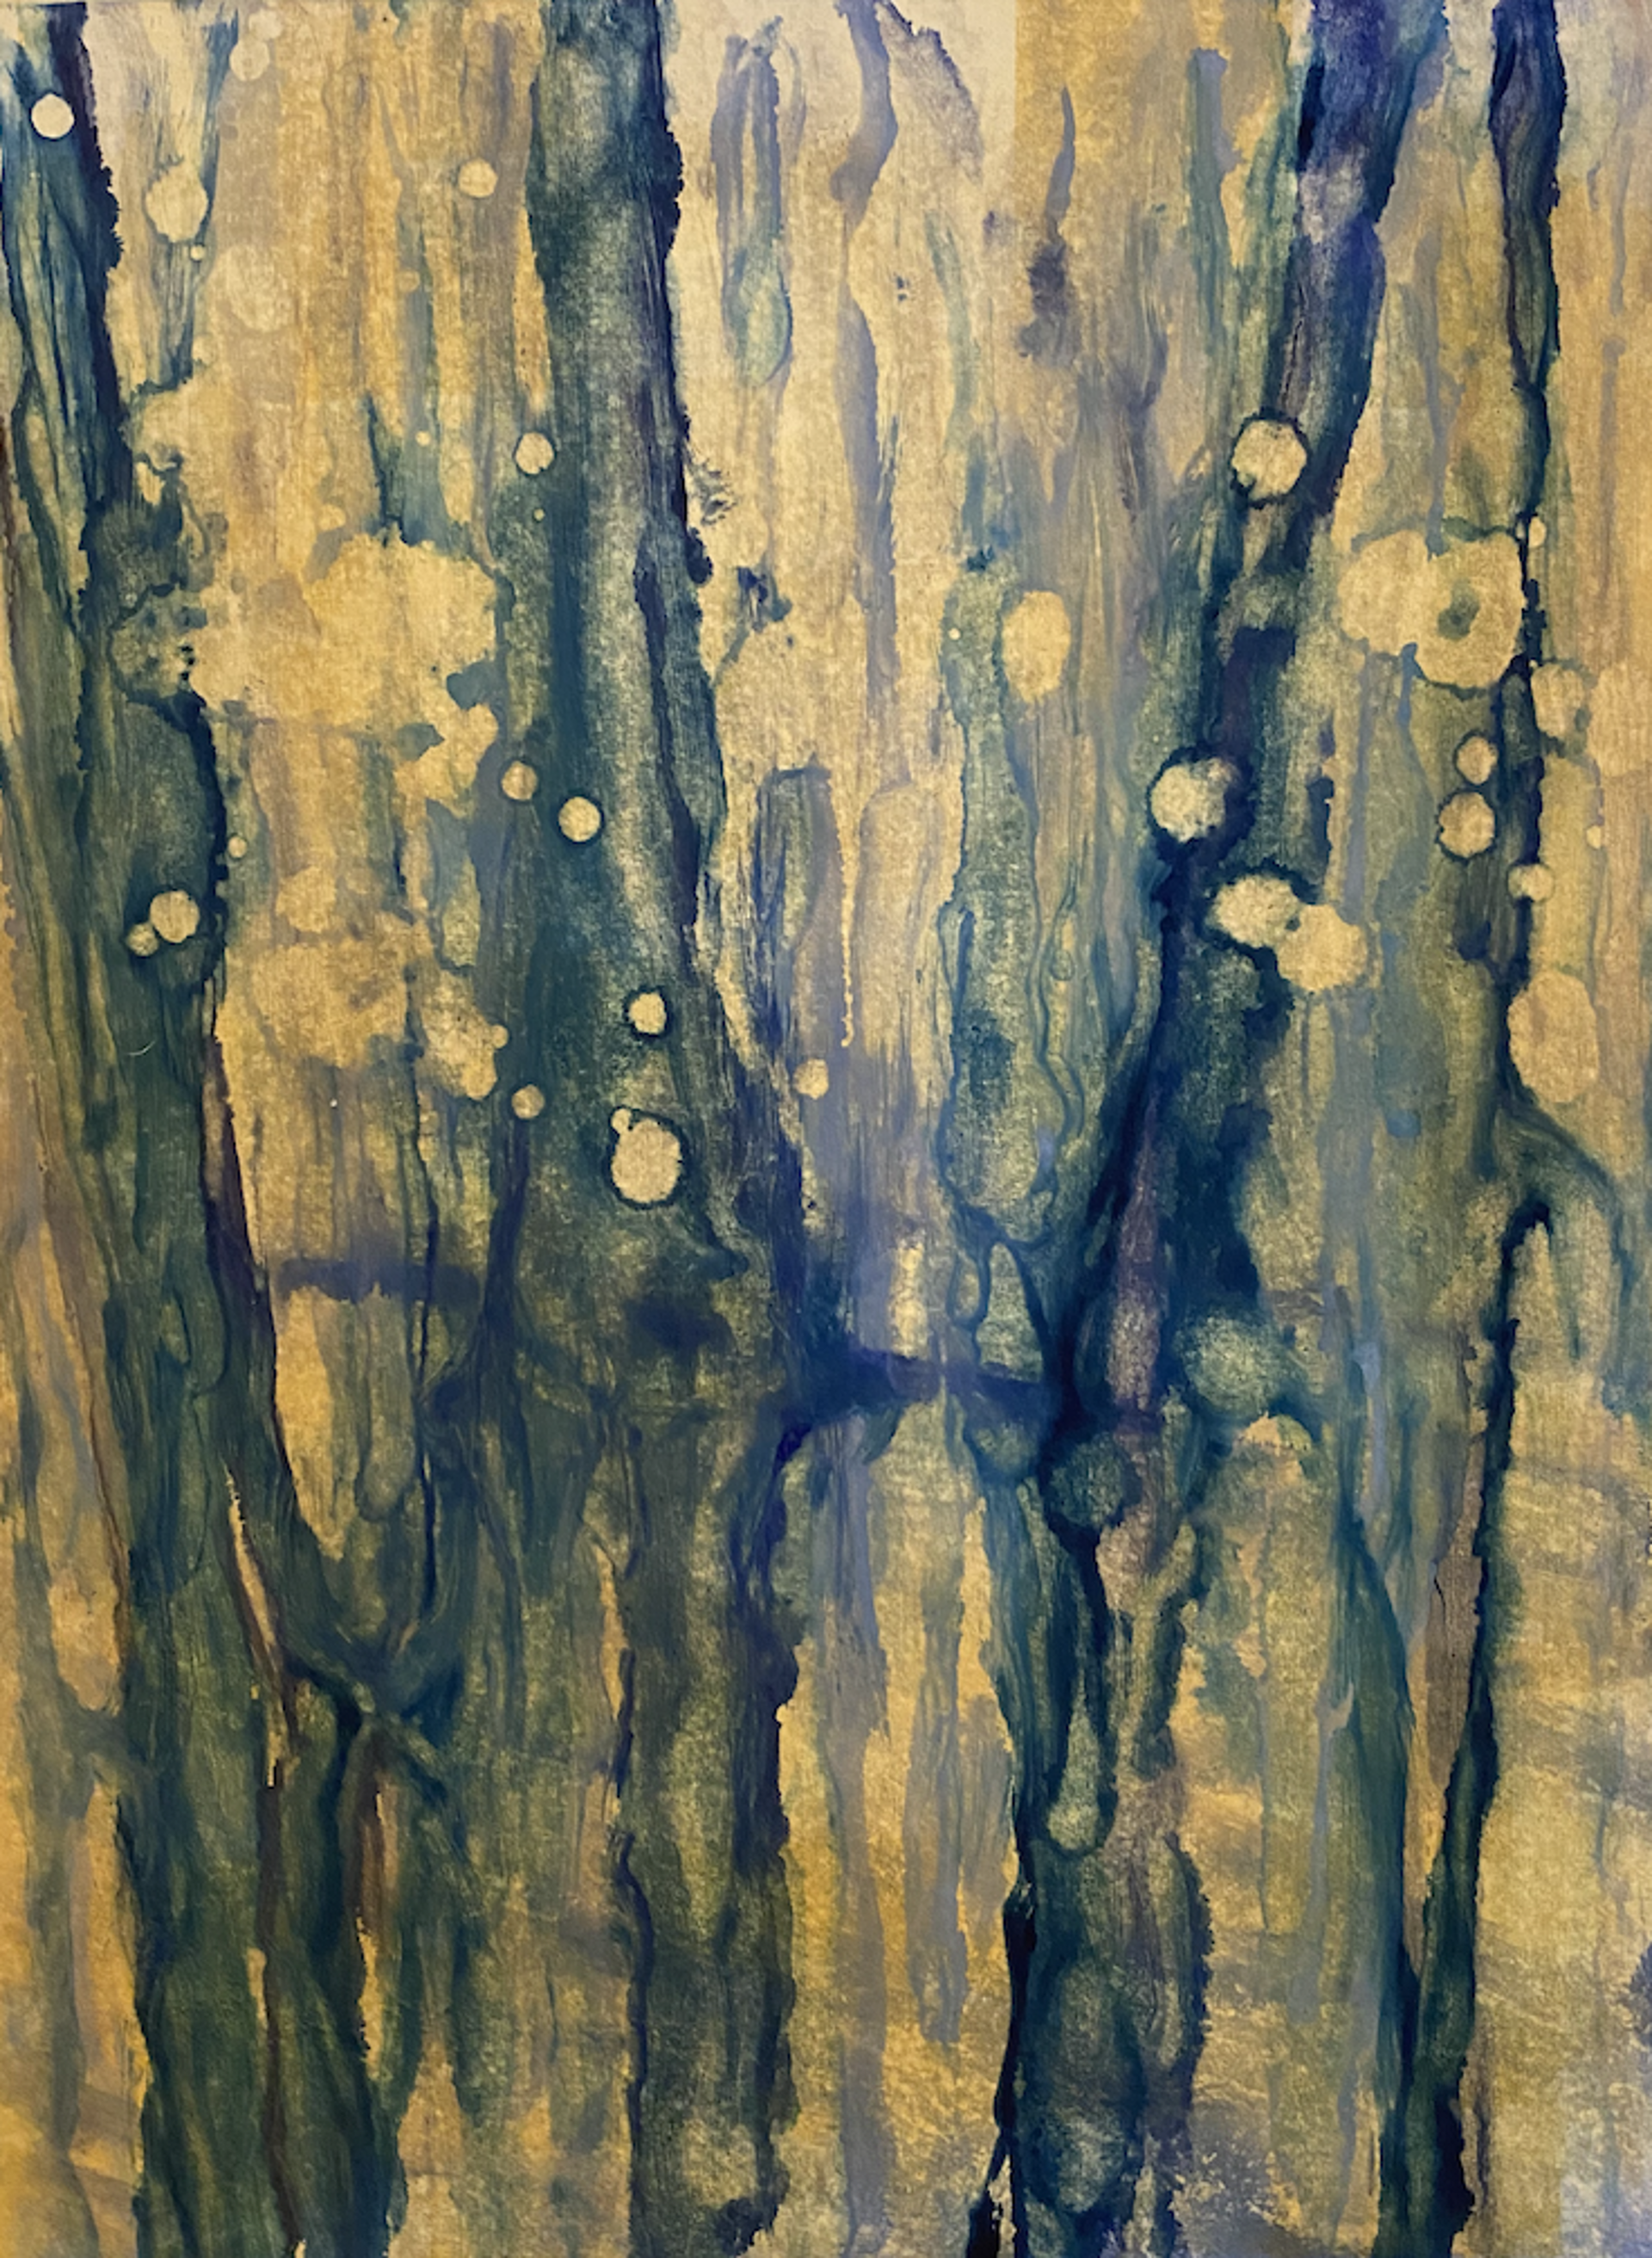 Congaree XXVI by Mary Gilkerson